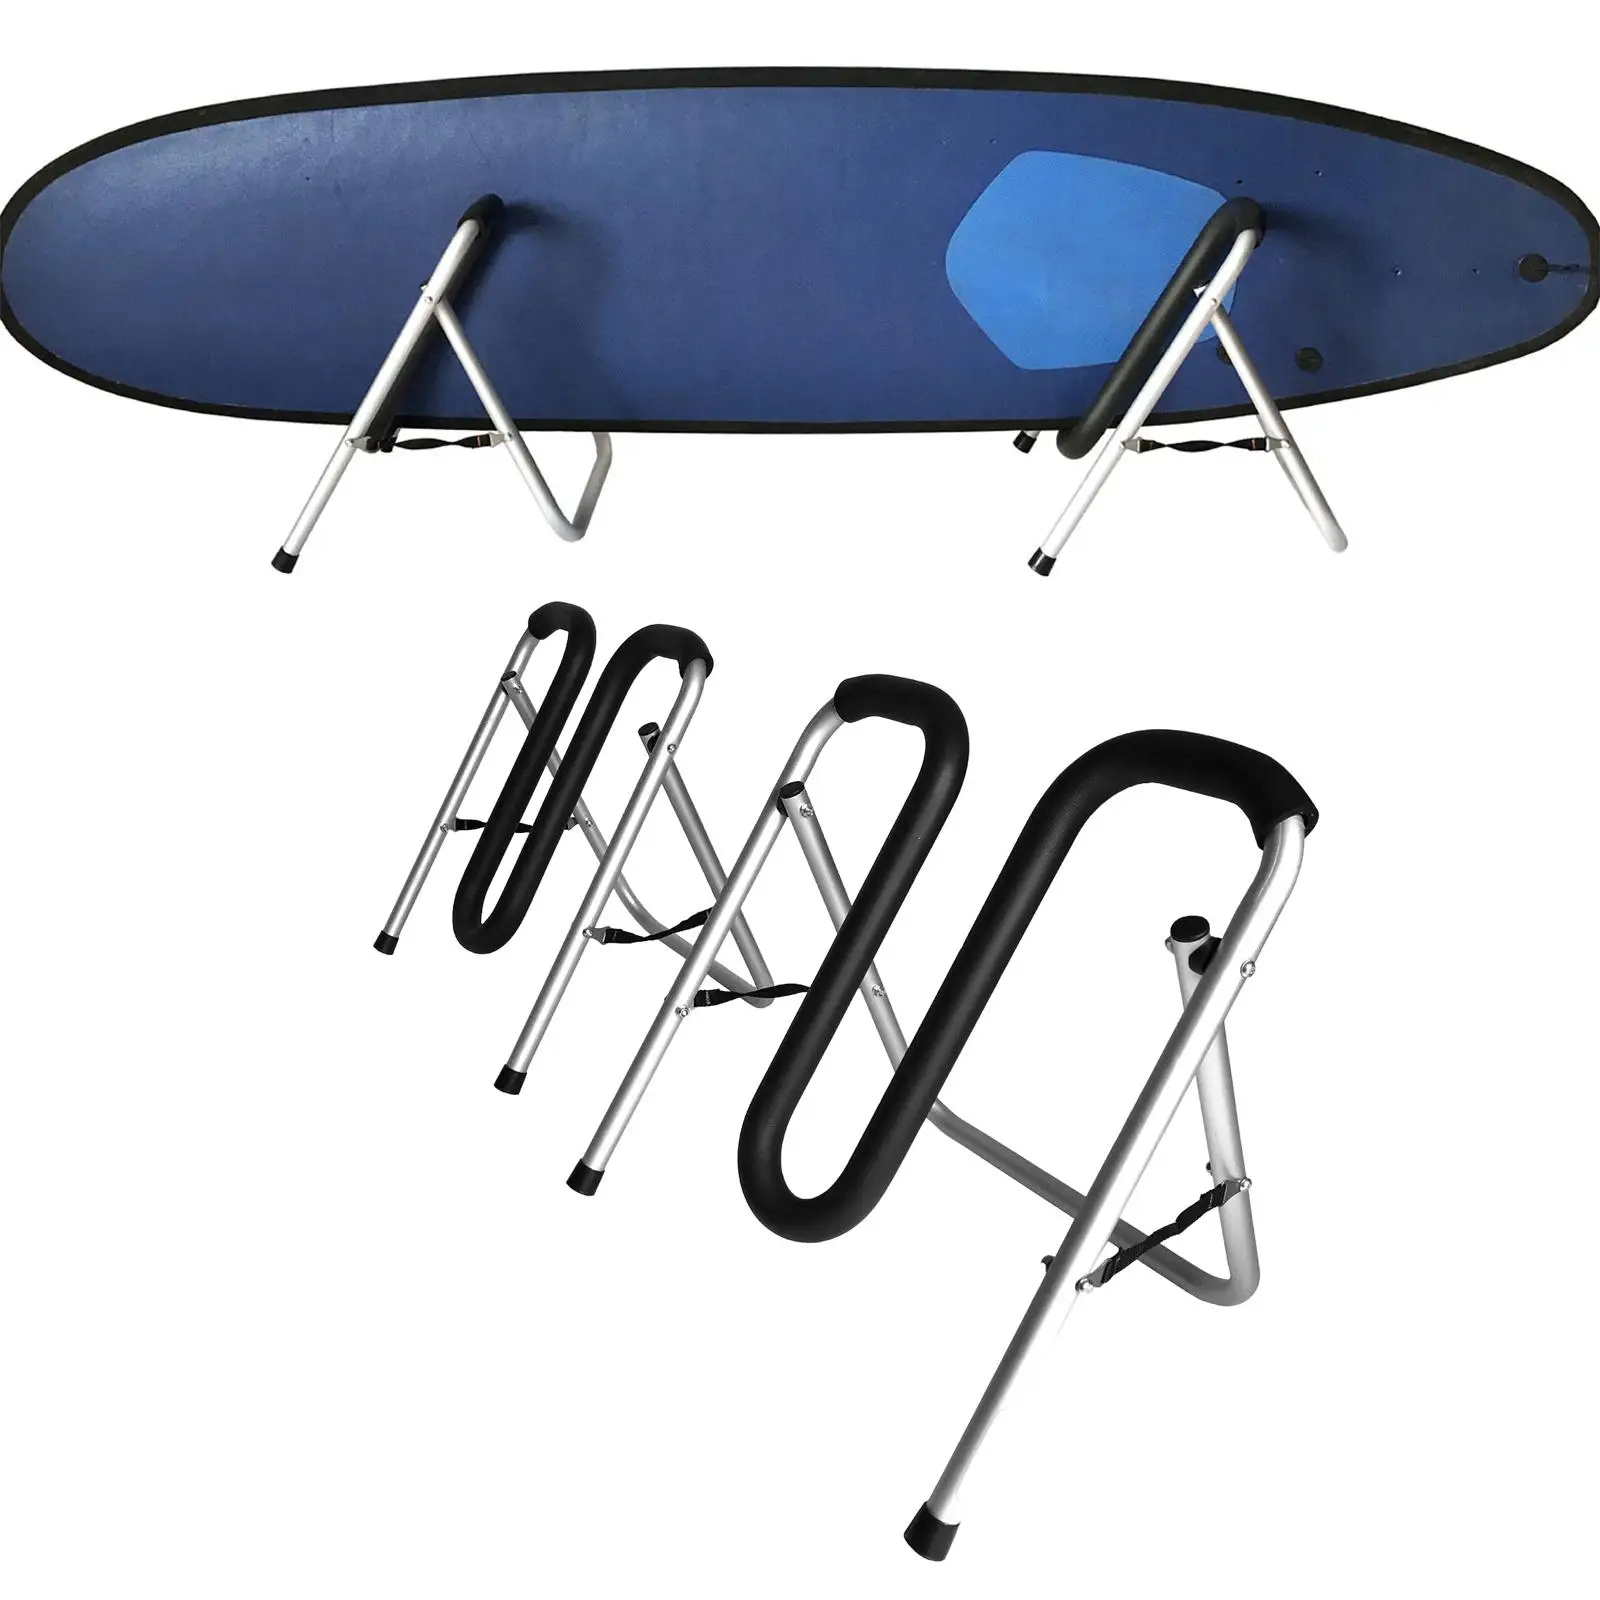 Foldable Surfboard Rack, Surfboard Storage Holder with Foam Protector, Surfboard Stand